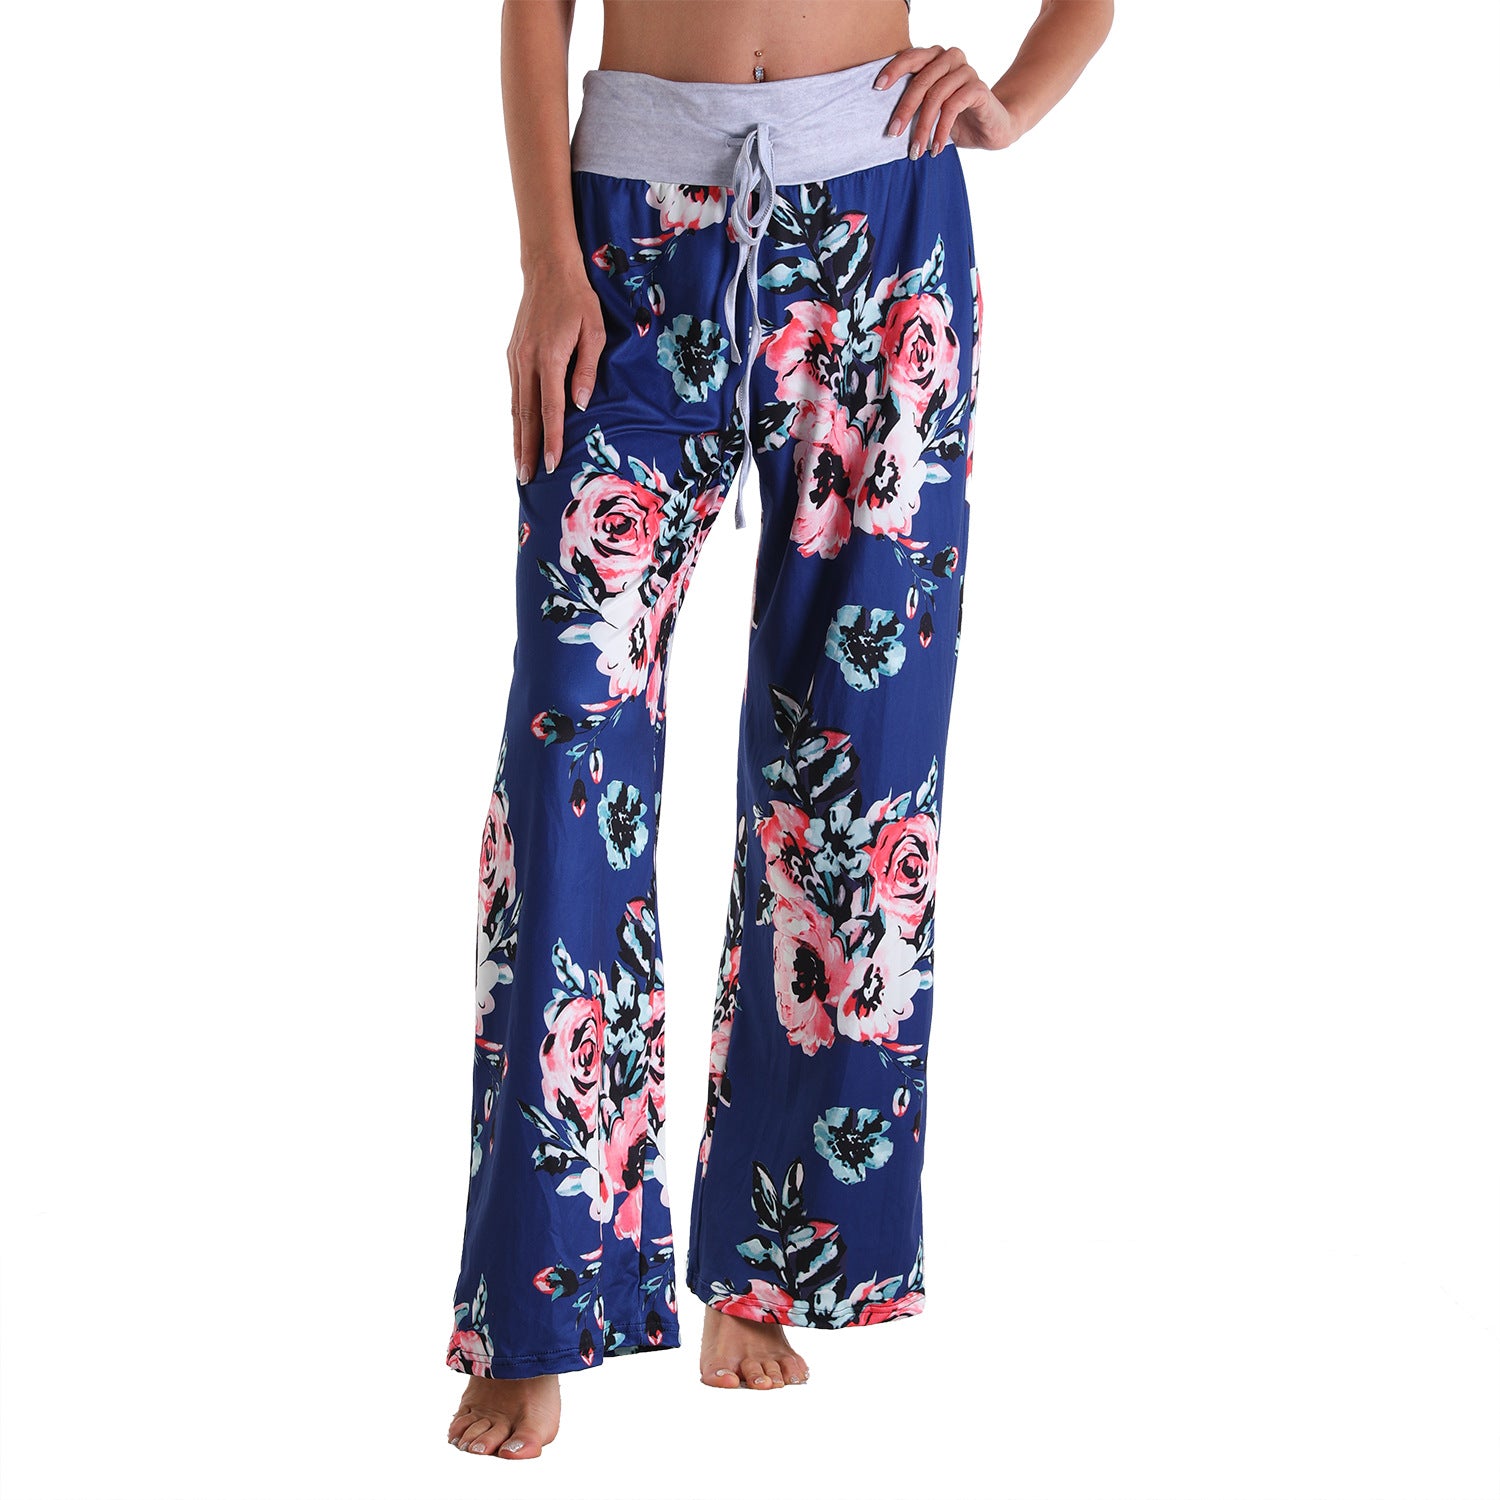 Casual Floral Print Women High Waist Trousers-Pajamas-2016-S-Free Shipping at meselling99